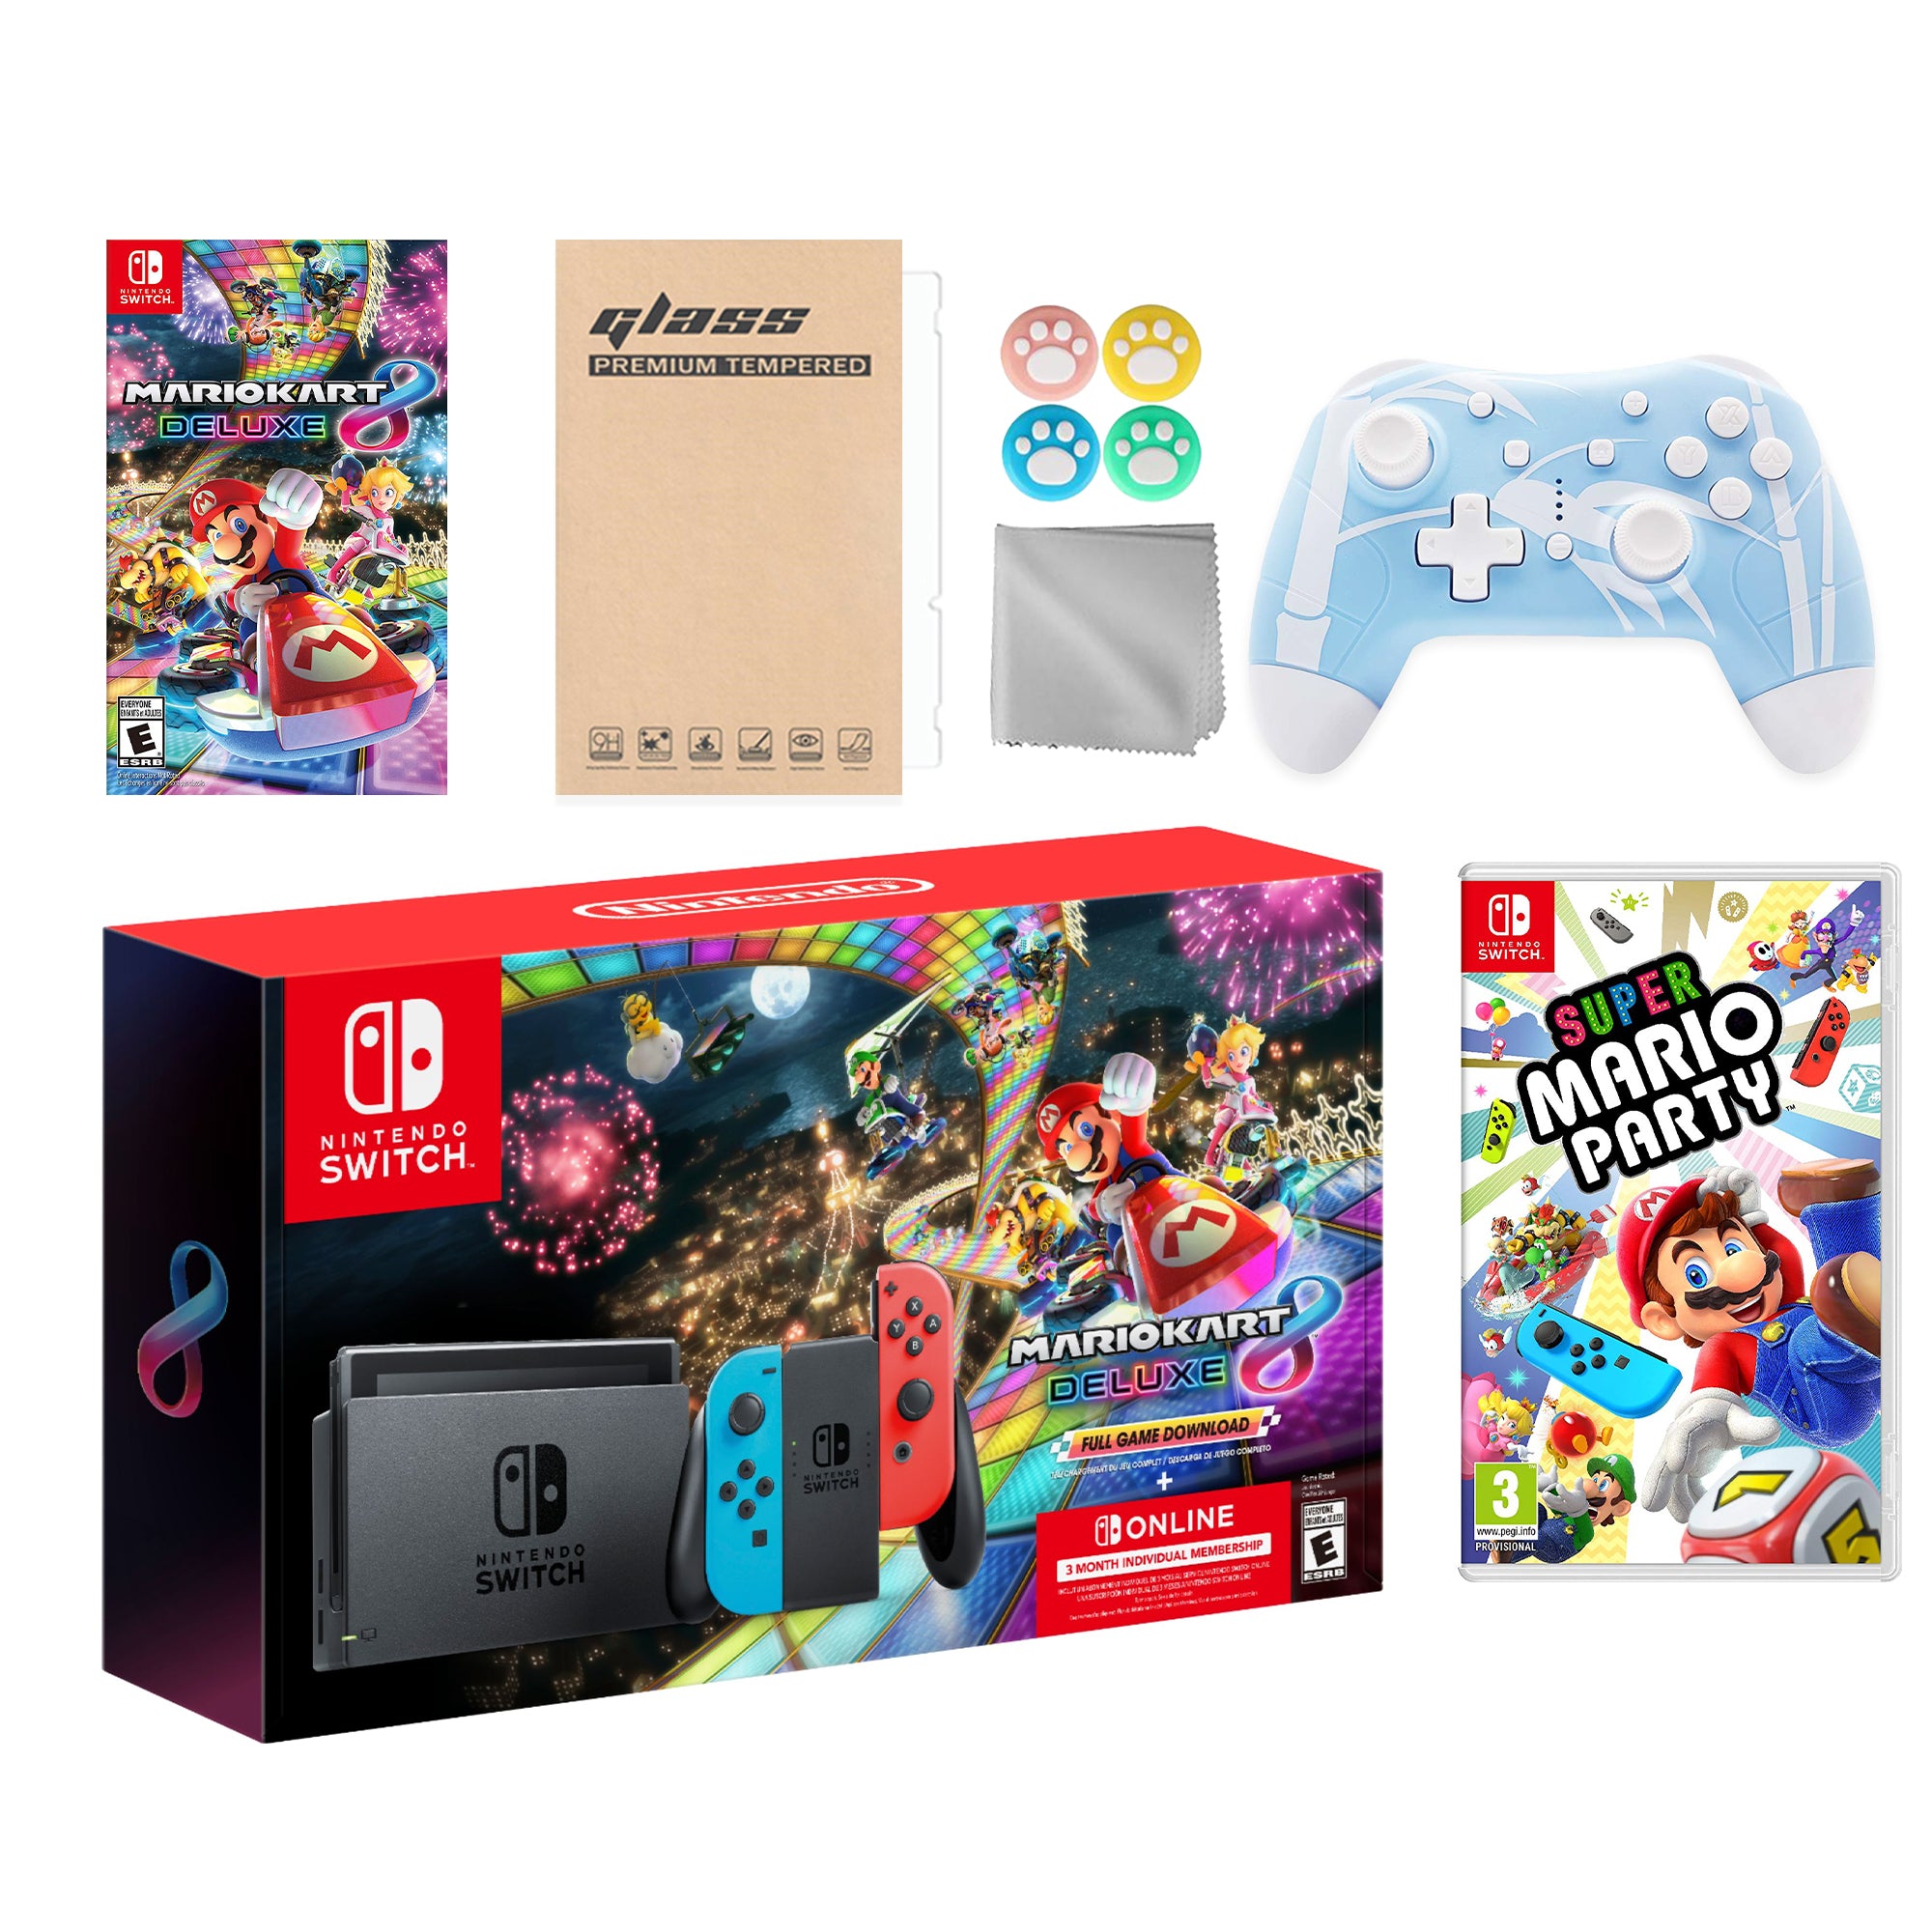 Nintendo Switch Mario Kart 8 Deluxe Bundle: Red Blue Console, Mario Kart 8 & Membership, Super Mario Party, Mytrix Wireless Pro Controller Blue Bamboo and Accessories